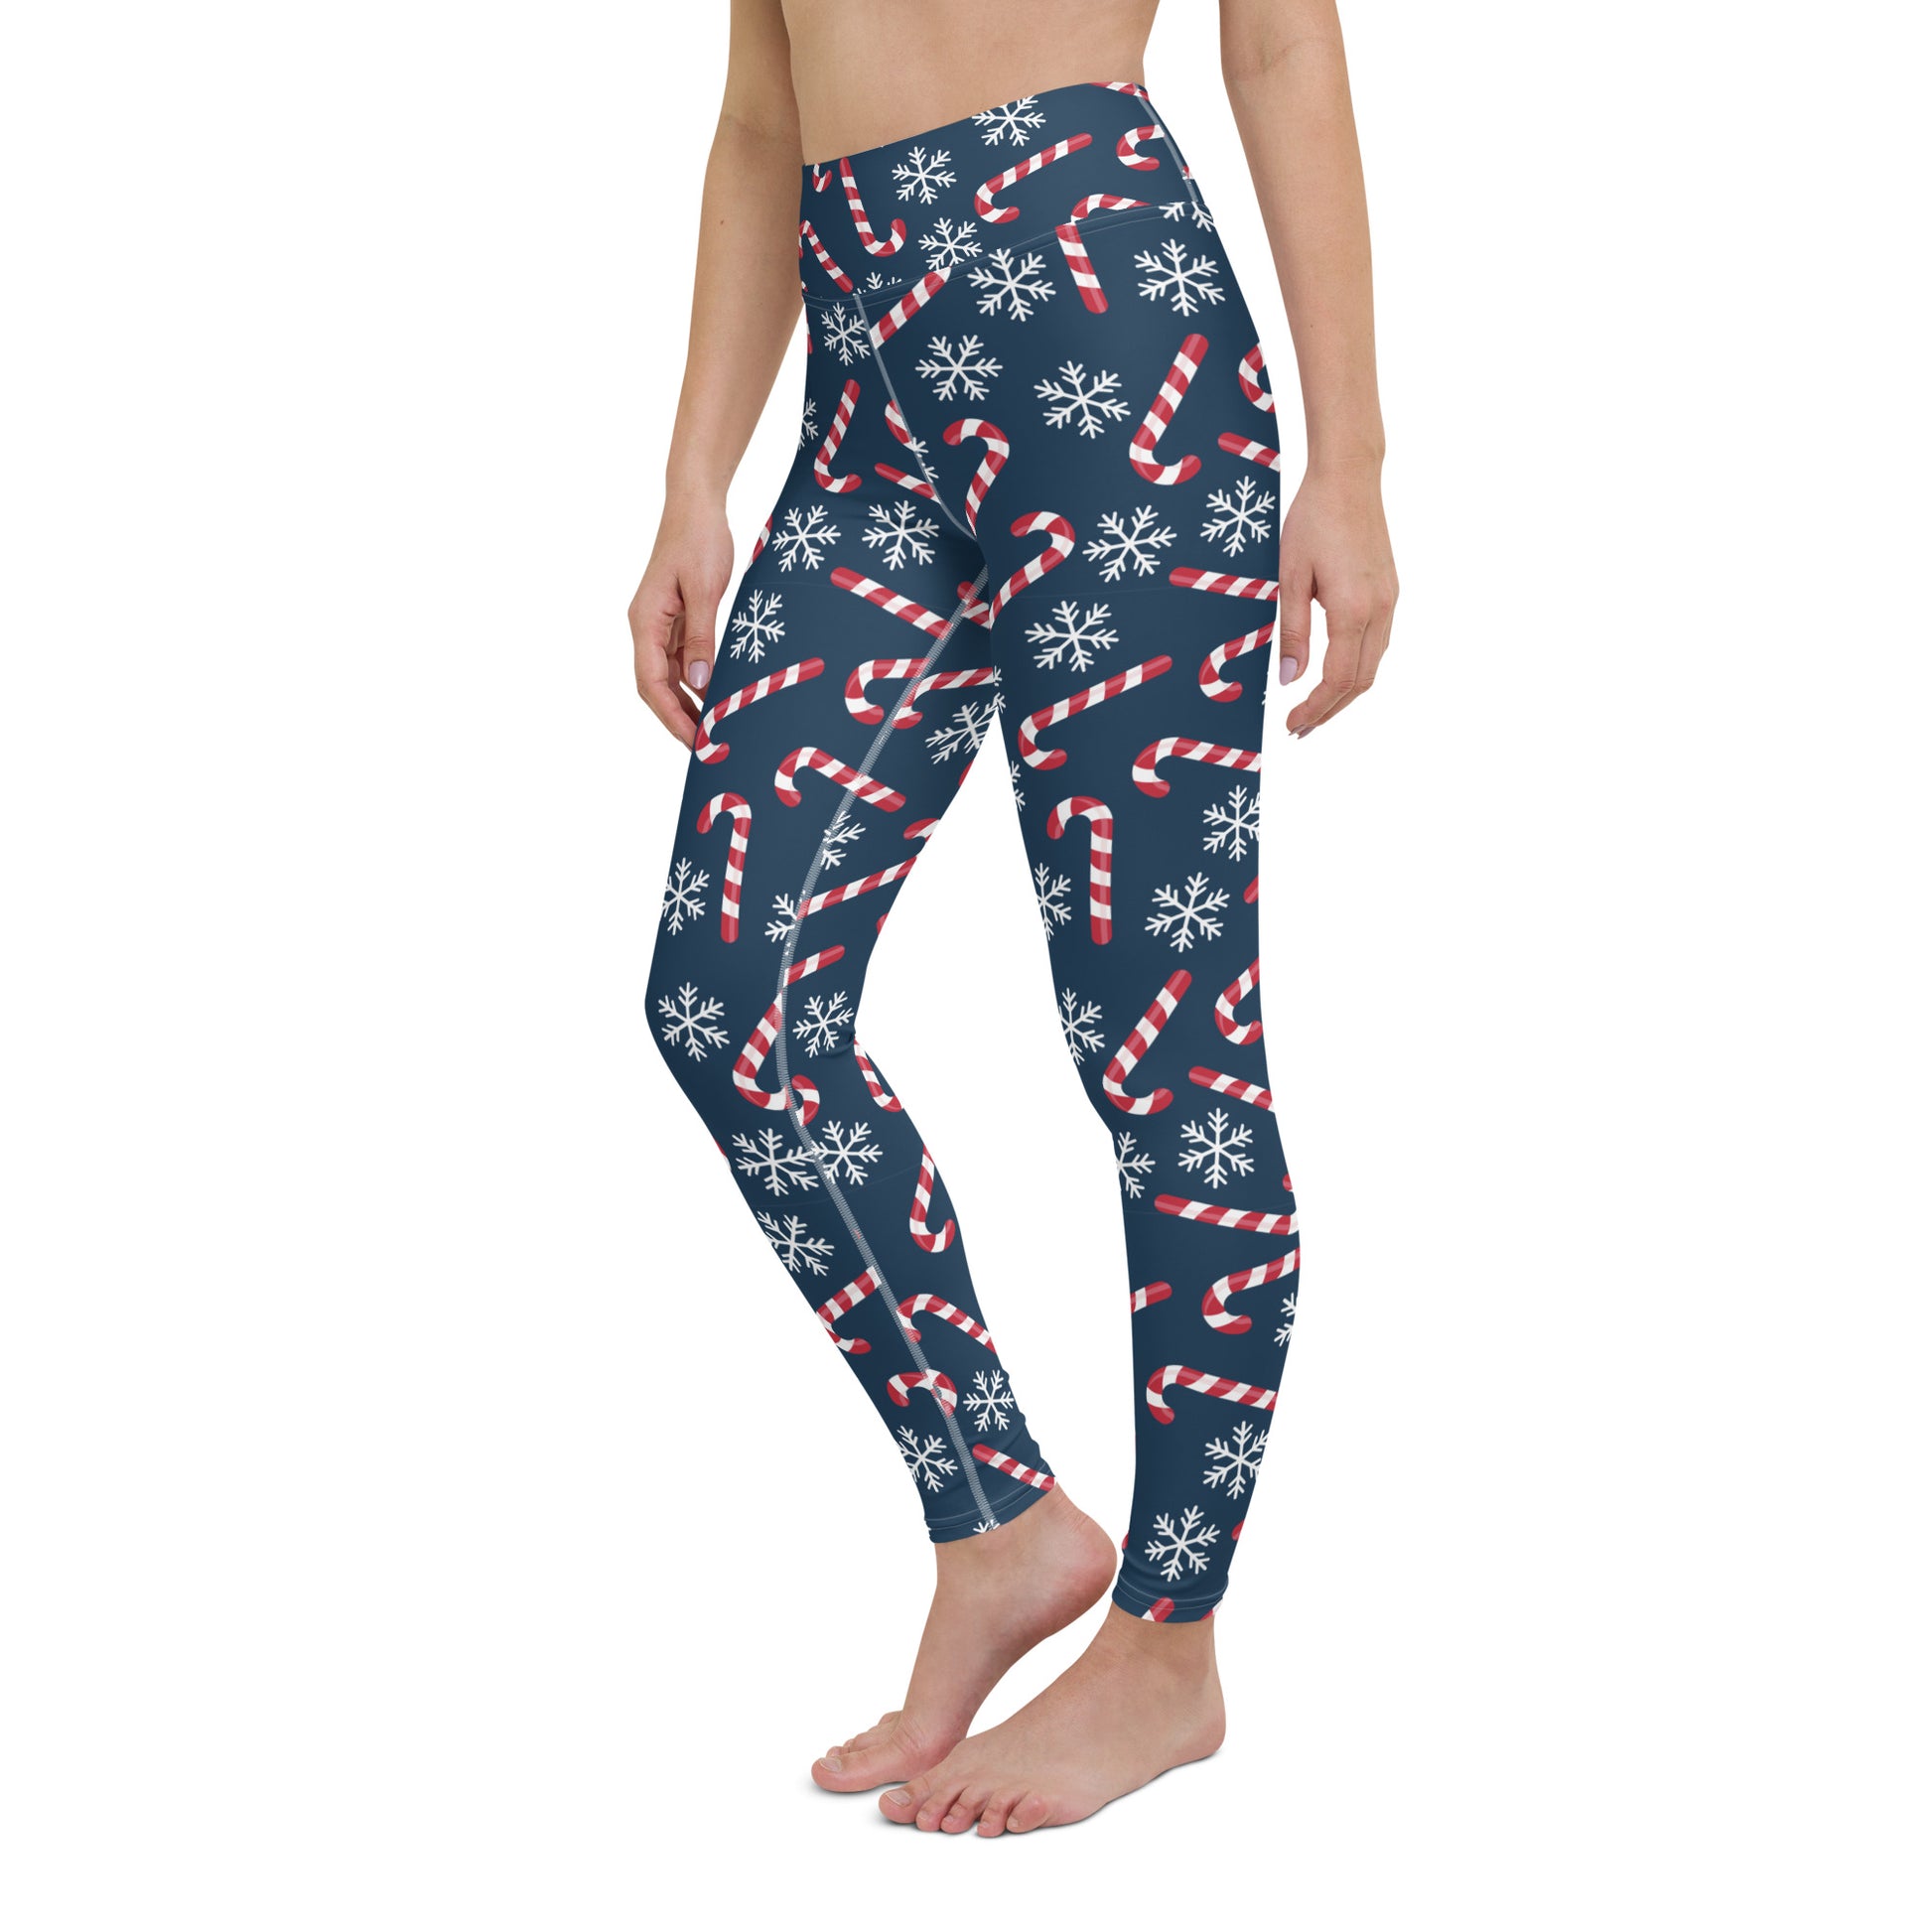 Candy Cane Leggings, High Waisted Snowflakes Blue Christmas Holidays Printed Yoga Workout Winter Party Women Pants Starcove Fashion